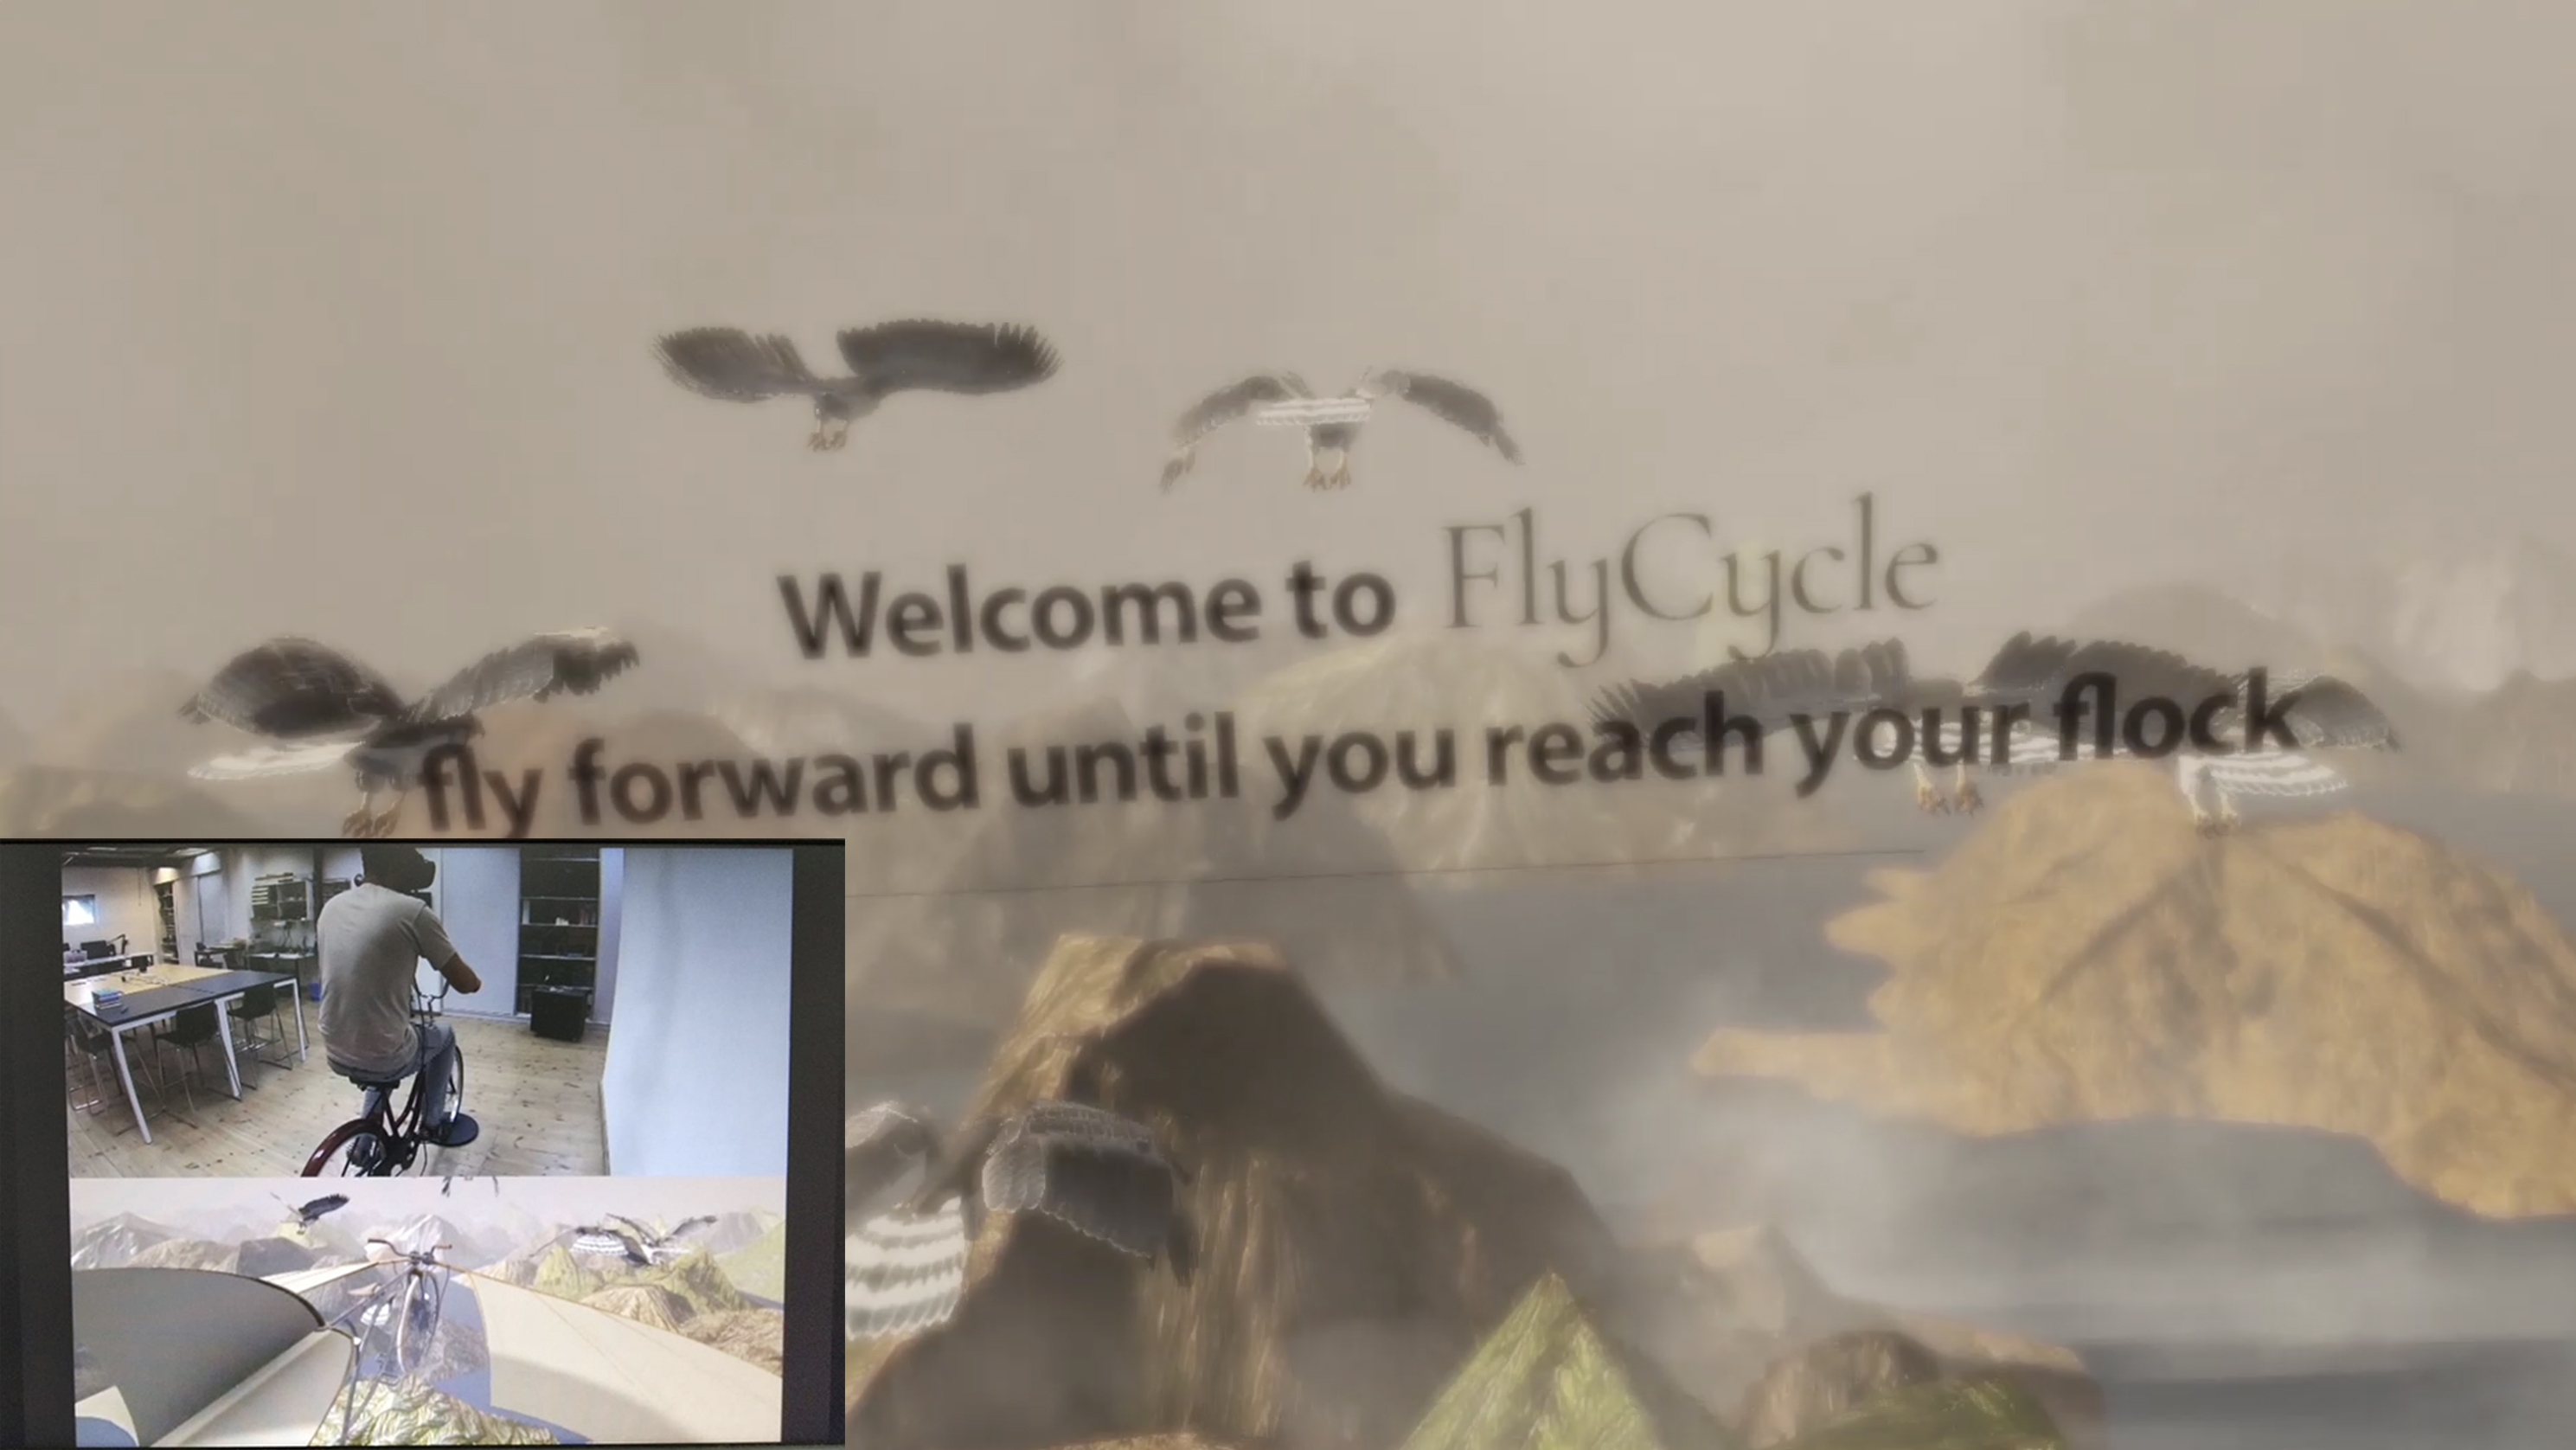 images/Fly-cycle/intro.jpg